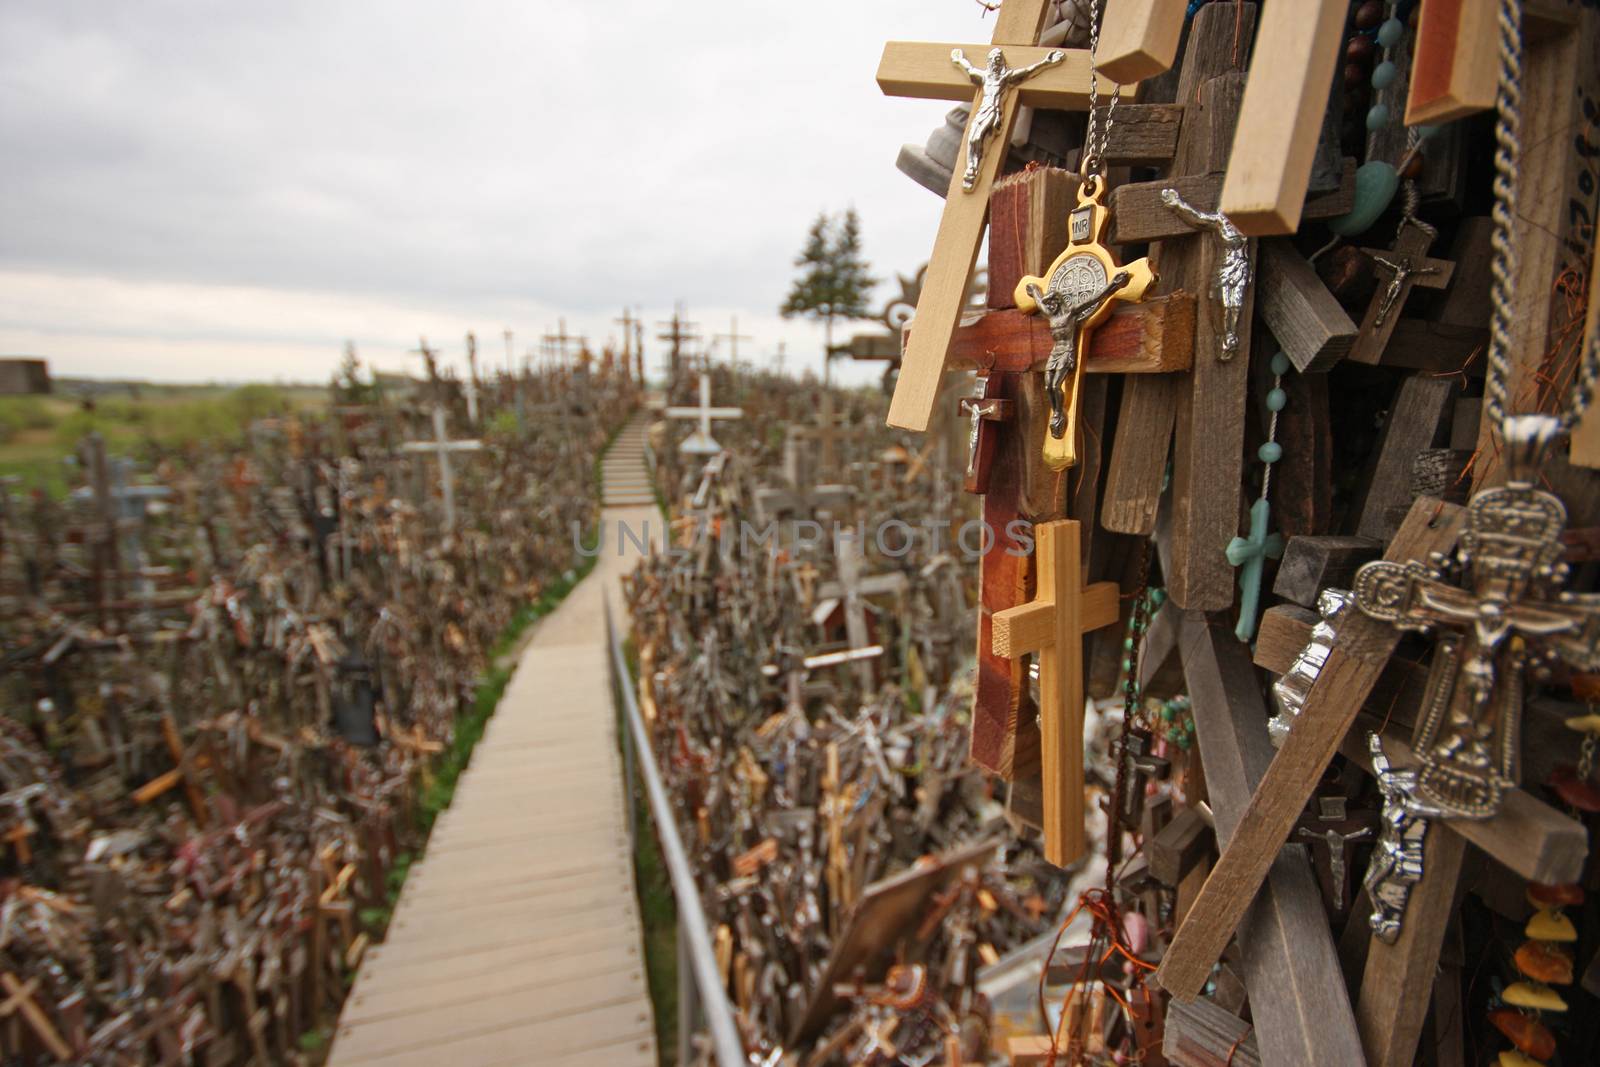 The Hill of Crosses is a pilgrimage site in north Lithuania